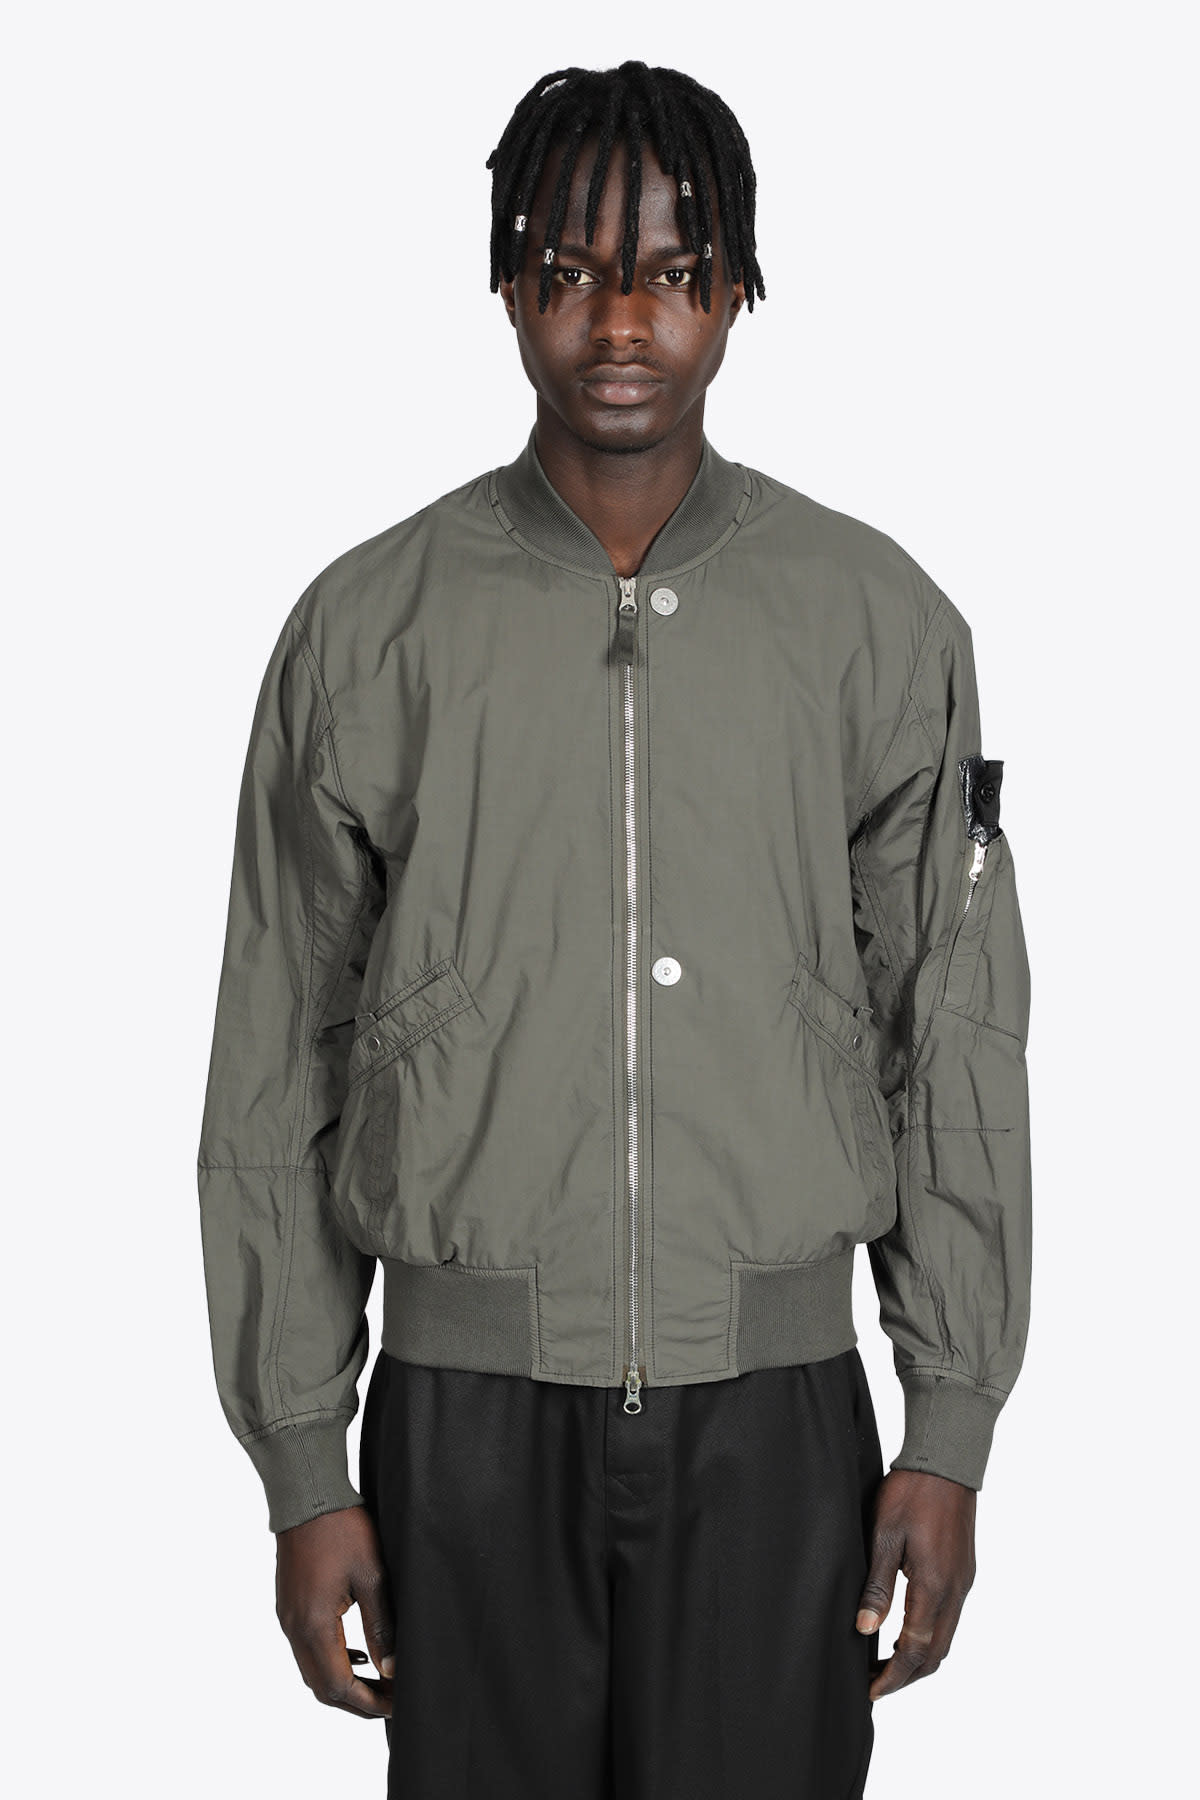 Stone Island Shadow Project Bomber Jacket Chapter 1 Military green cotton bomber jacket